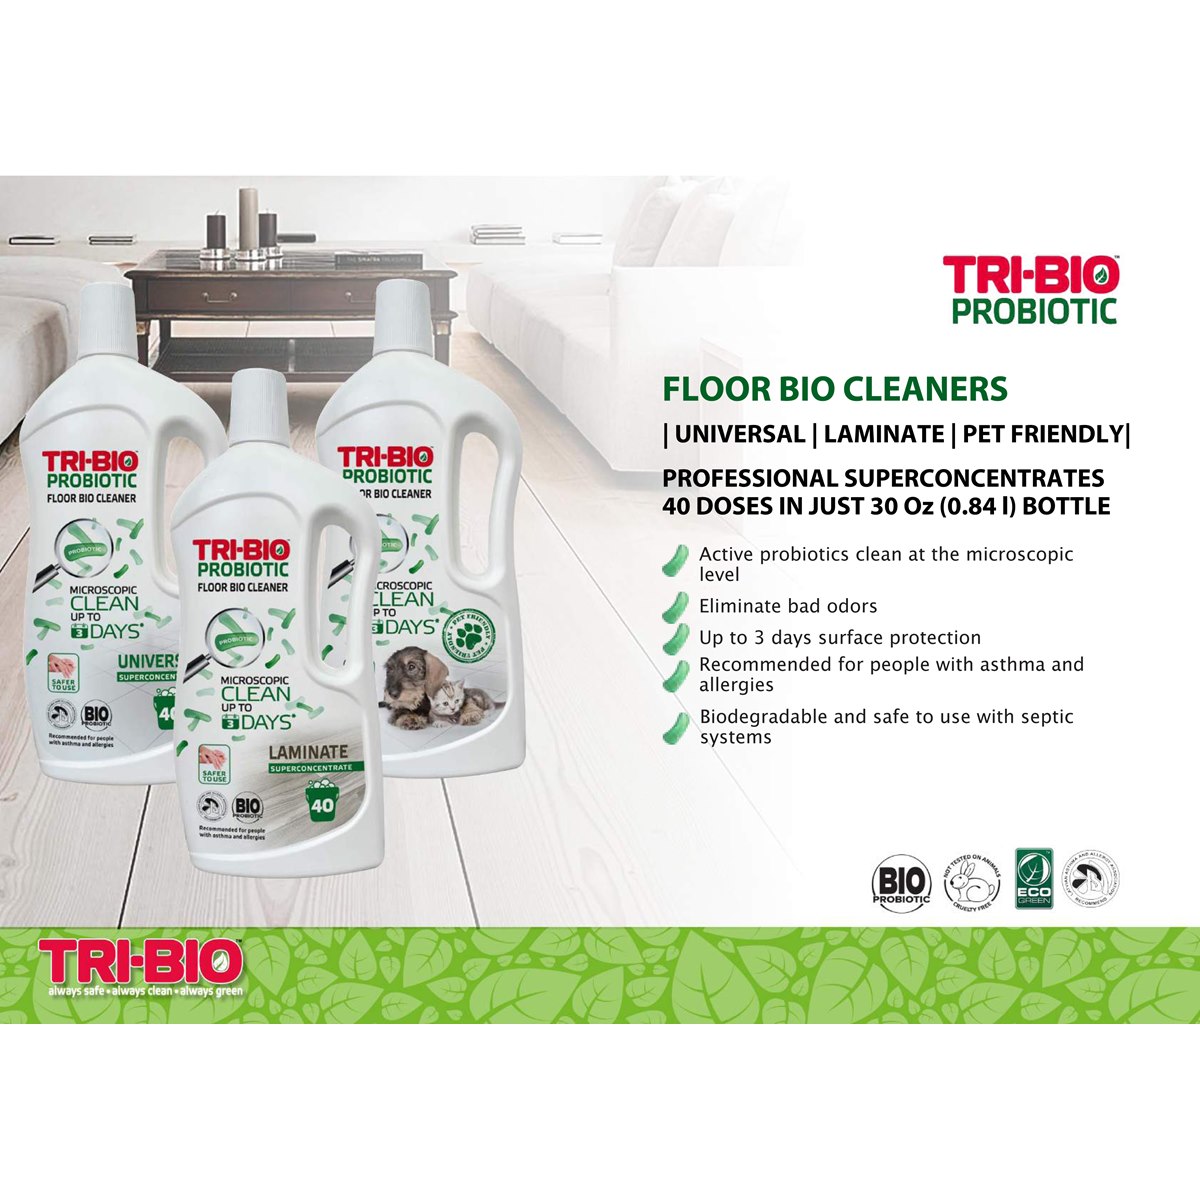 Where to Buy Tri-Bio Floor Cleaners